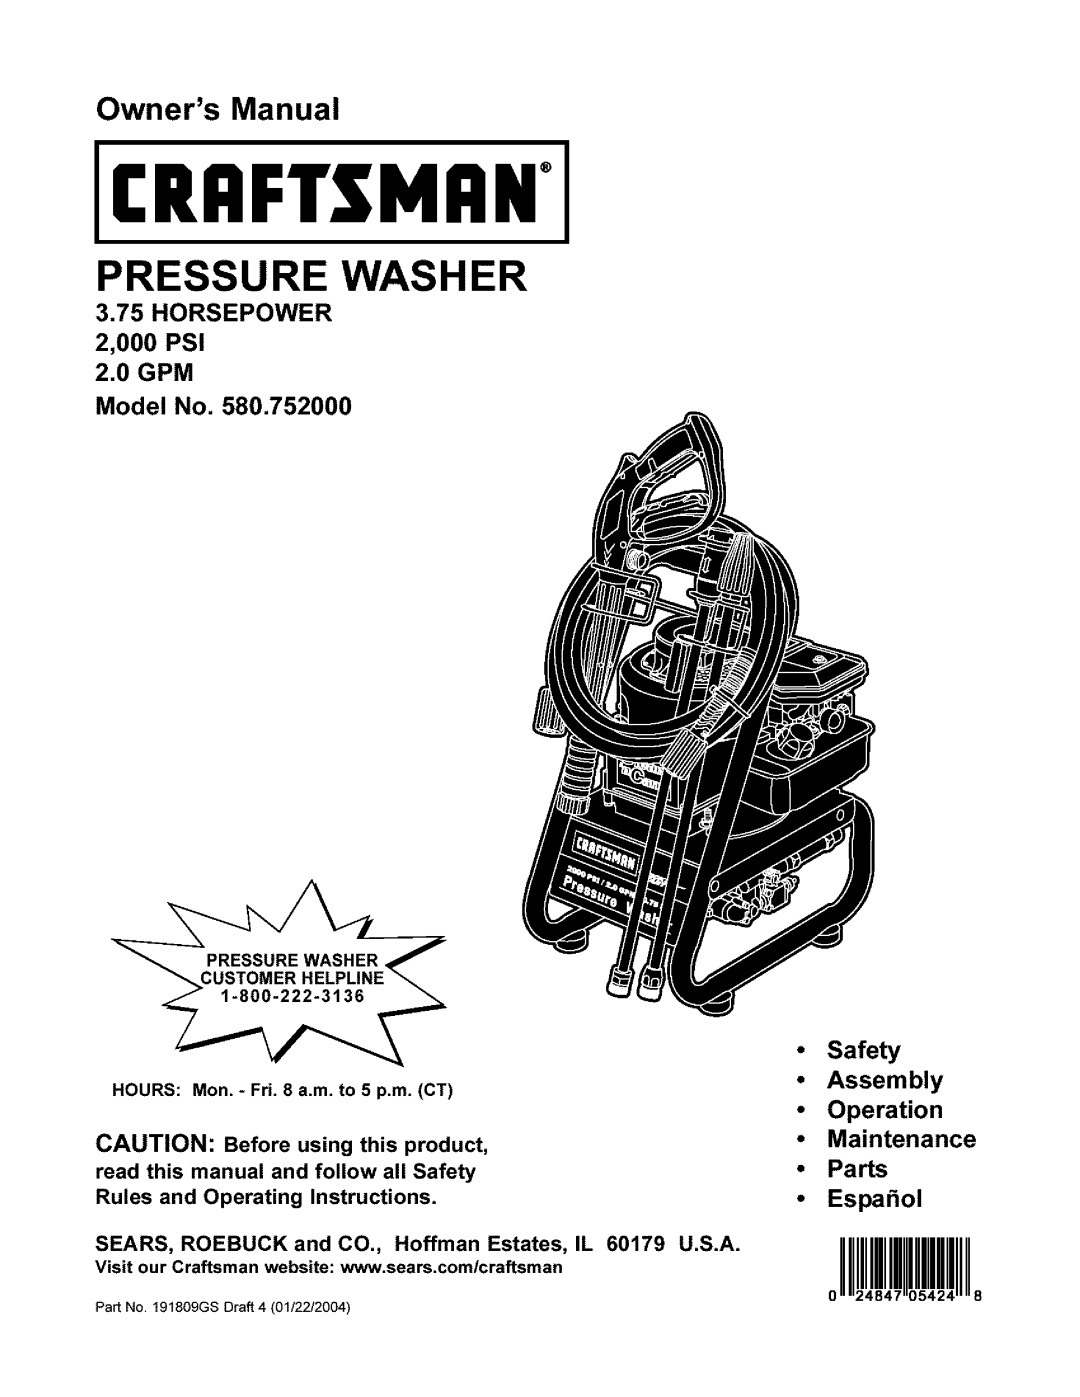 Craftsman 580.752 owner manual Pressure Washer, HORSEPOWER 2,000 PSI 2.0 GPM Model No, •Safety •Assembly, Operation, Parts 